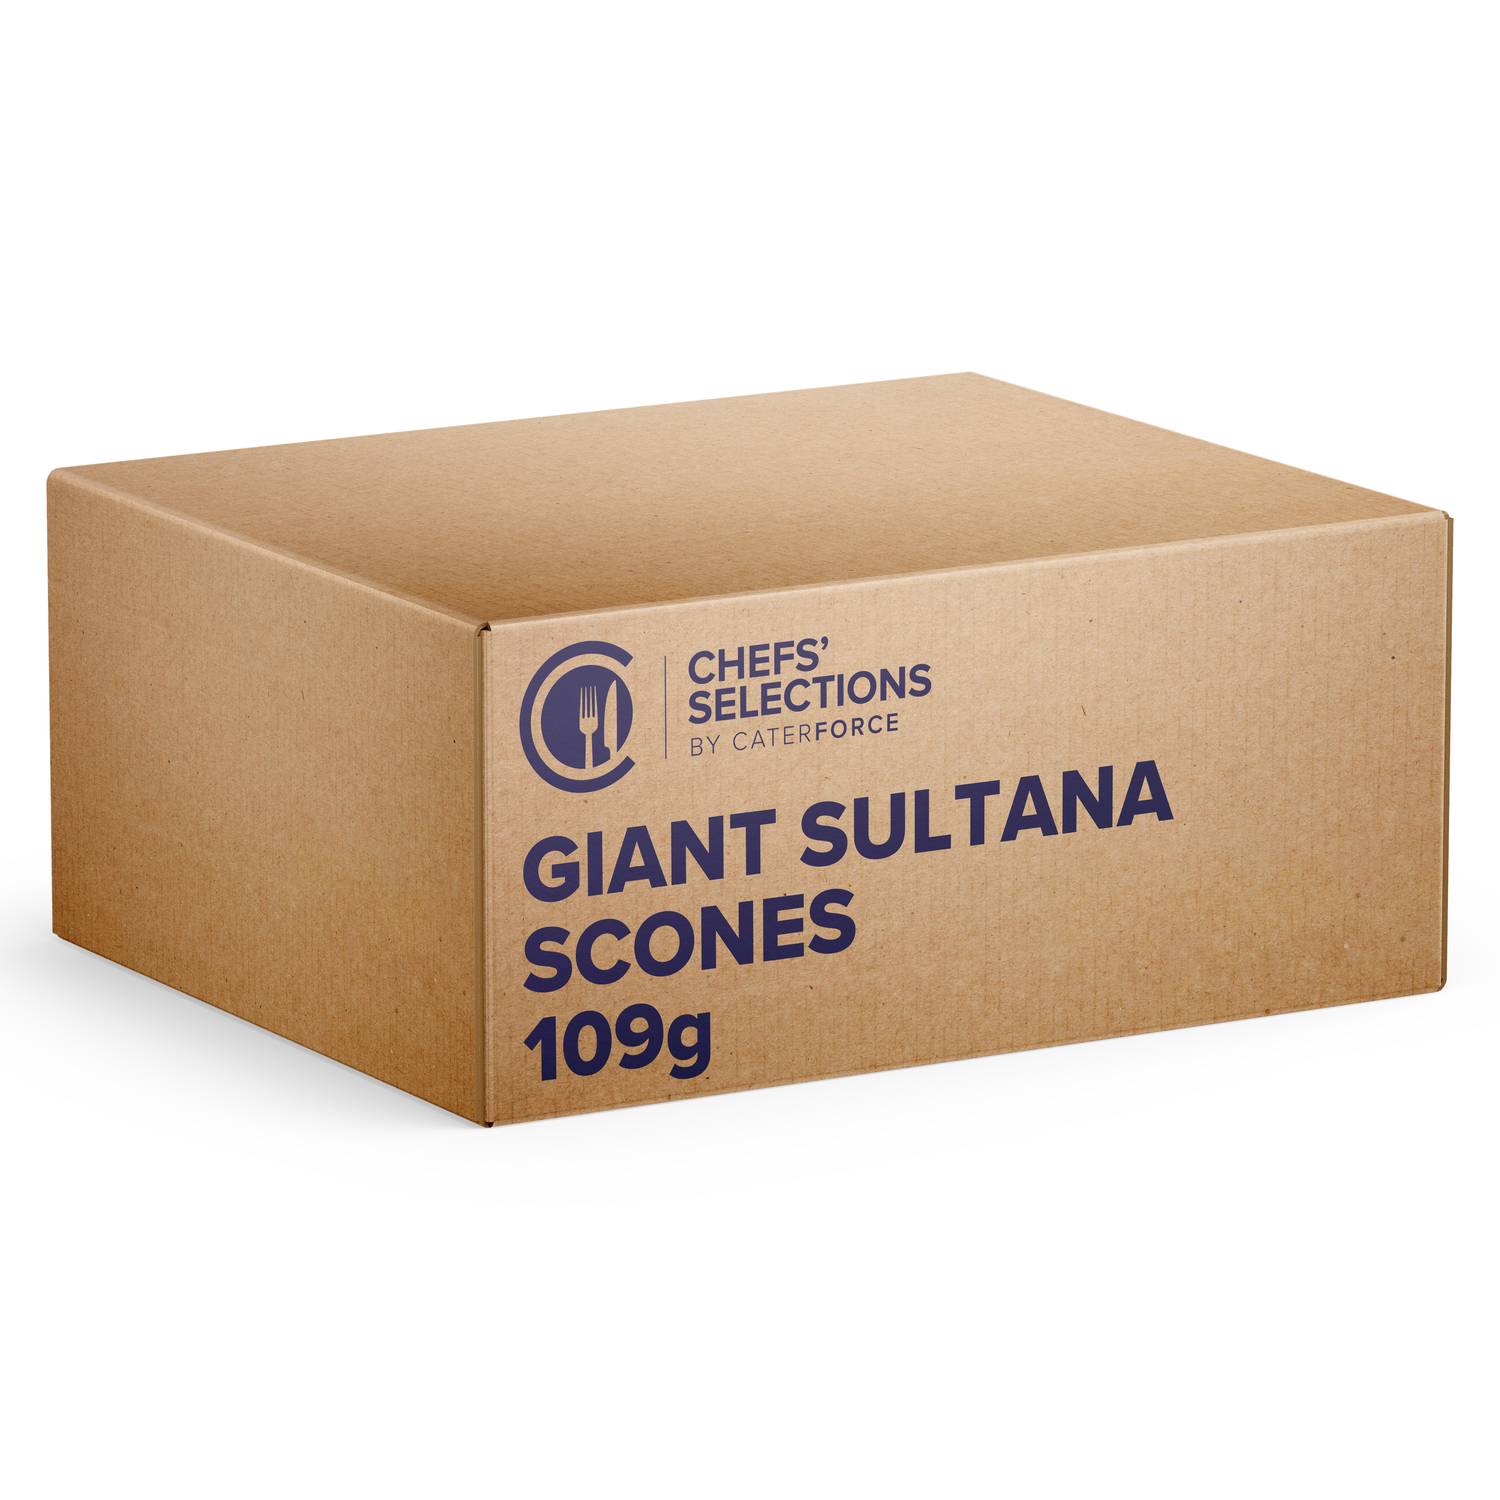 Chefs’ Selections Giant Sultana Scone (24 x 109g)